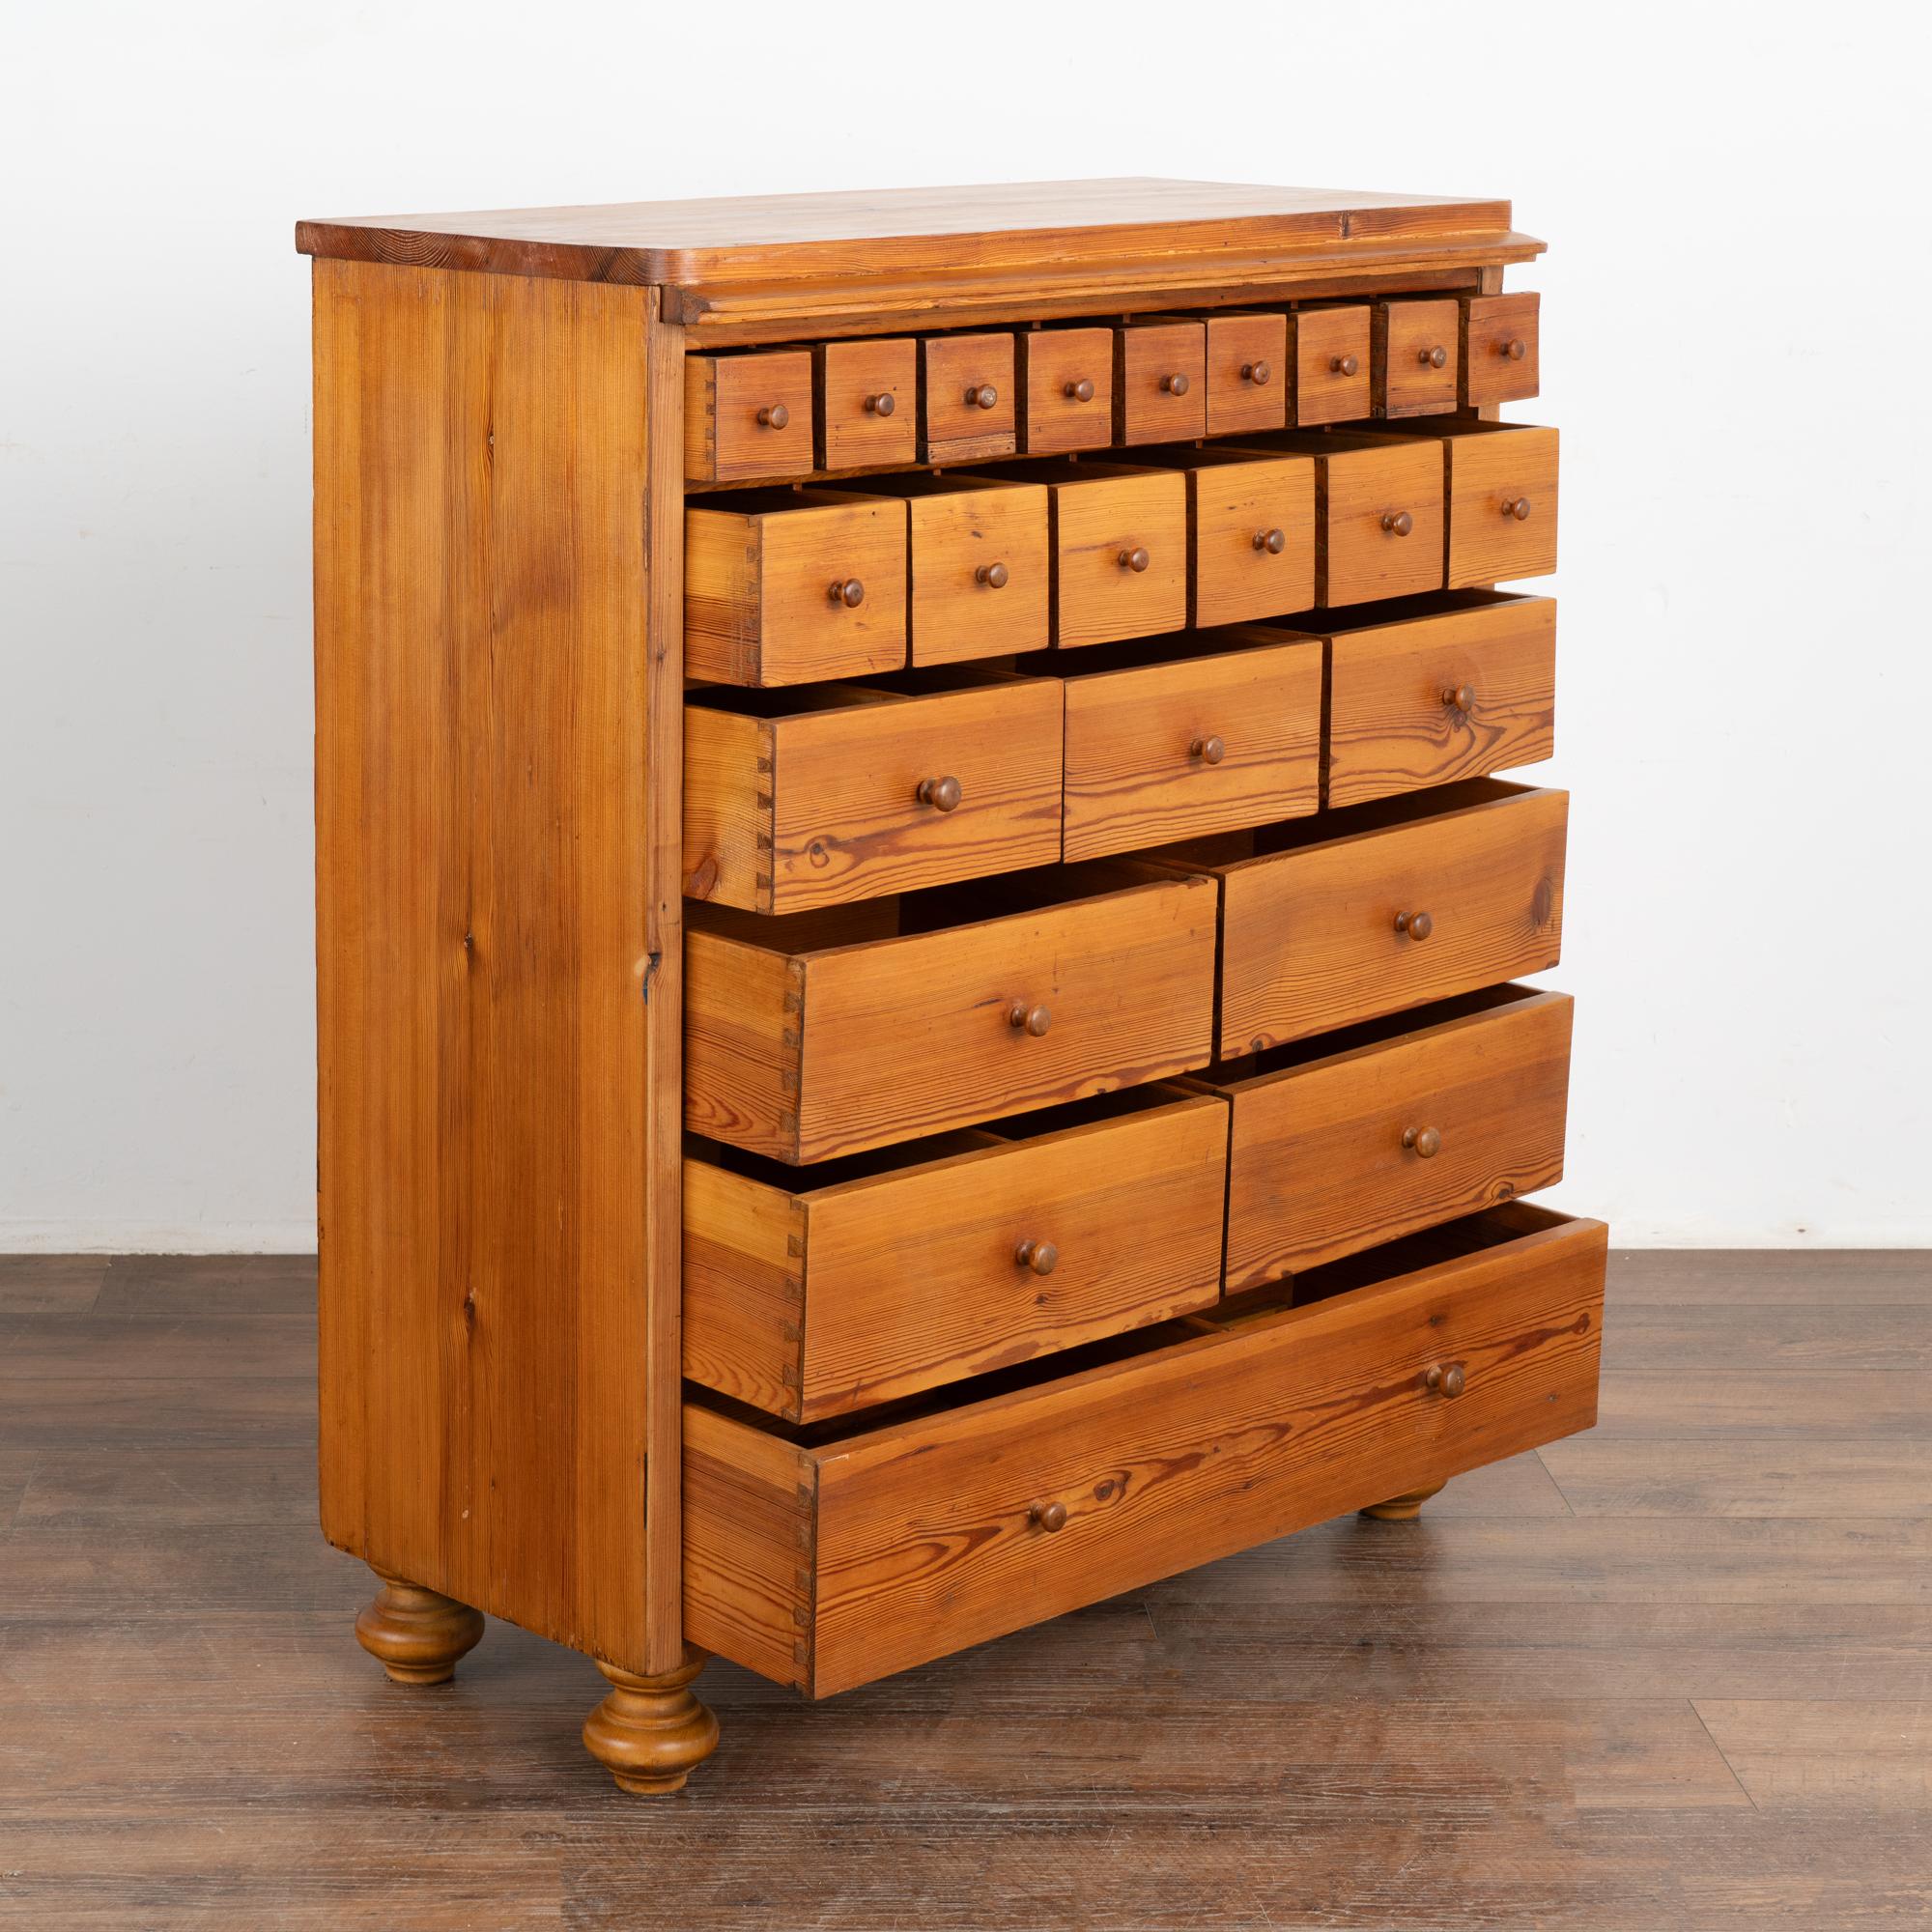 Country Pine Apothecary Chest of Drawers, Denmark circa 1890